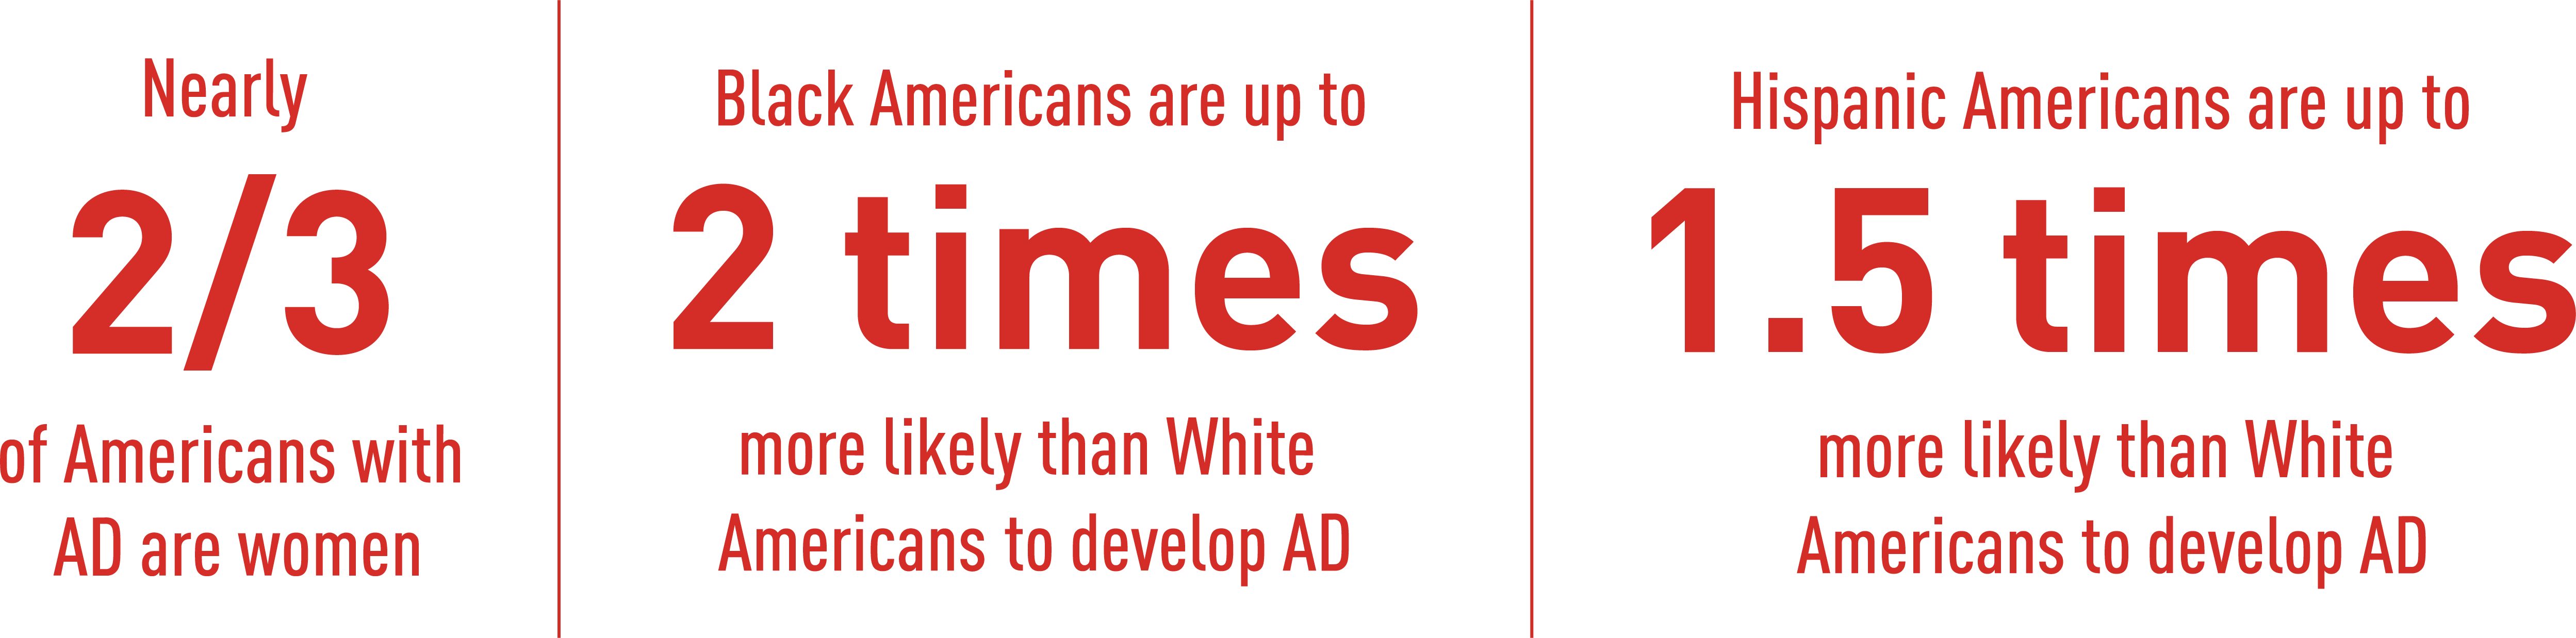 Nearly 2/3 of Americans with AD are women.African Americans are up to 2 times more likely than White Americans to develop AD.Hispanic Americans are up to 1.5 times more likely than White Americans to develop AD.